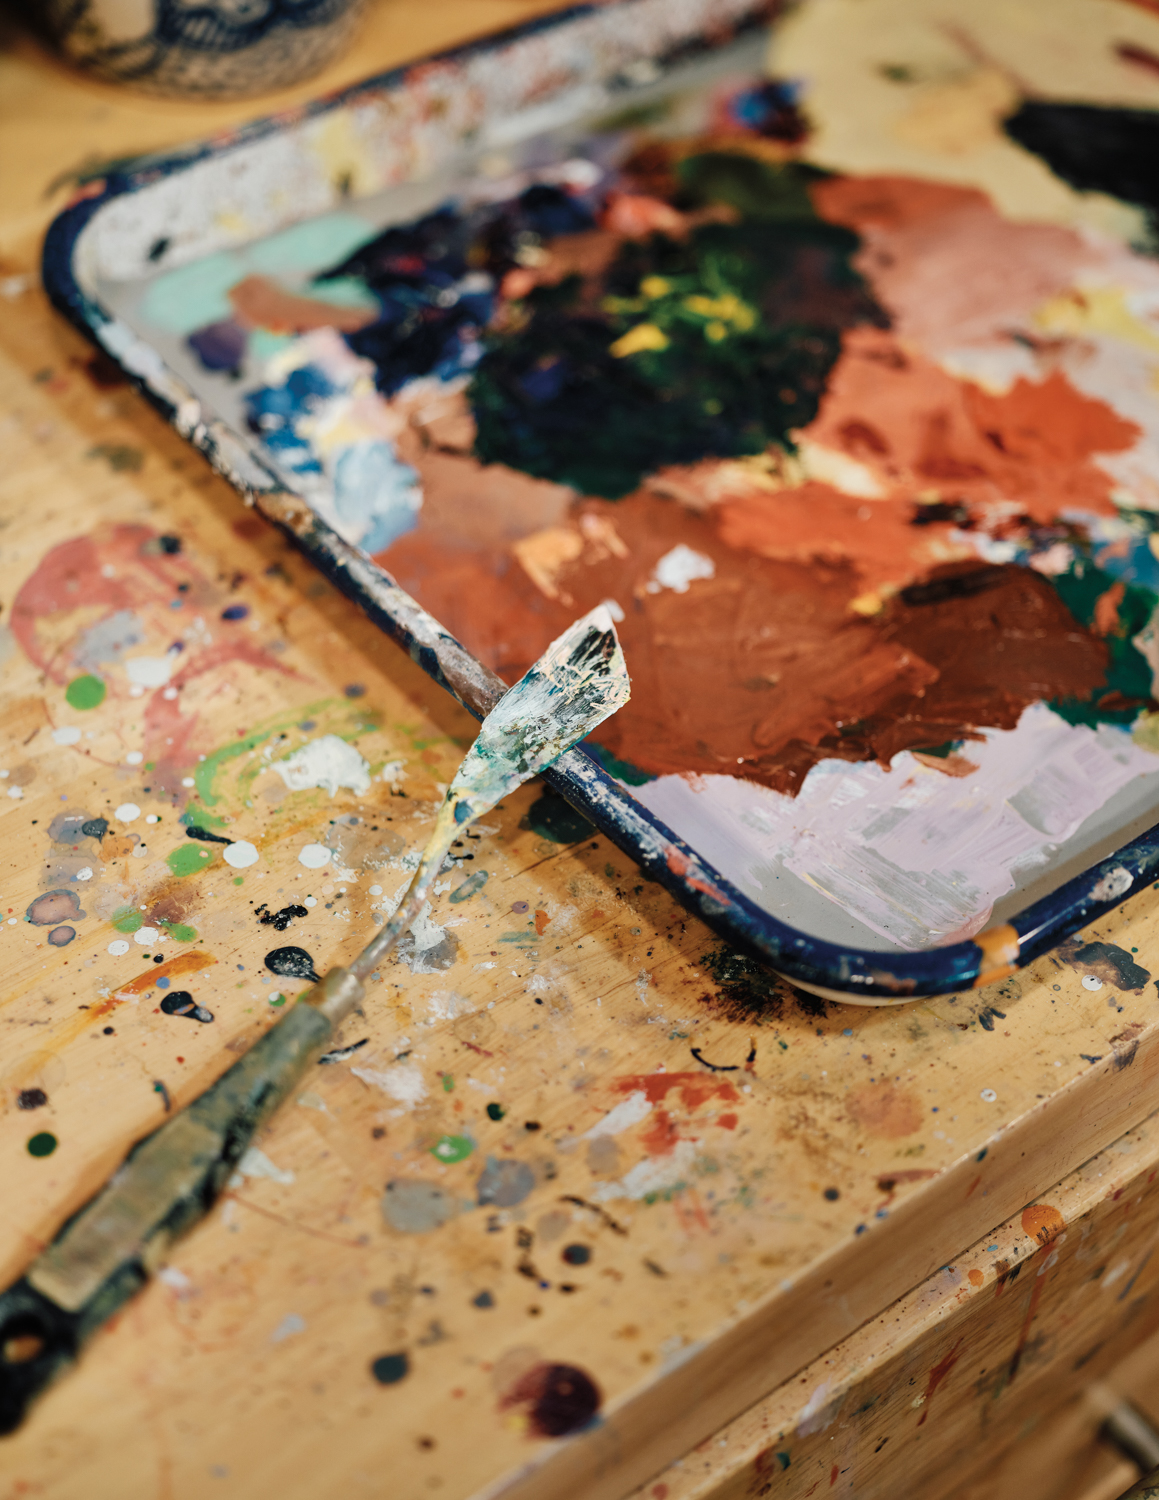 a paint covered palette knife and paint pan